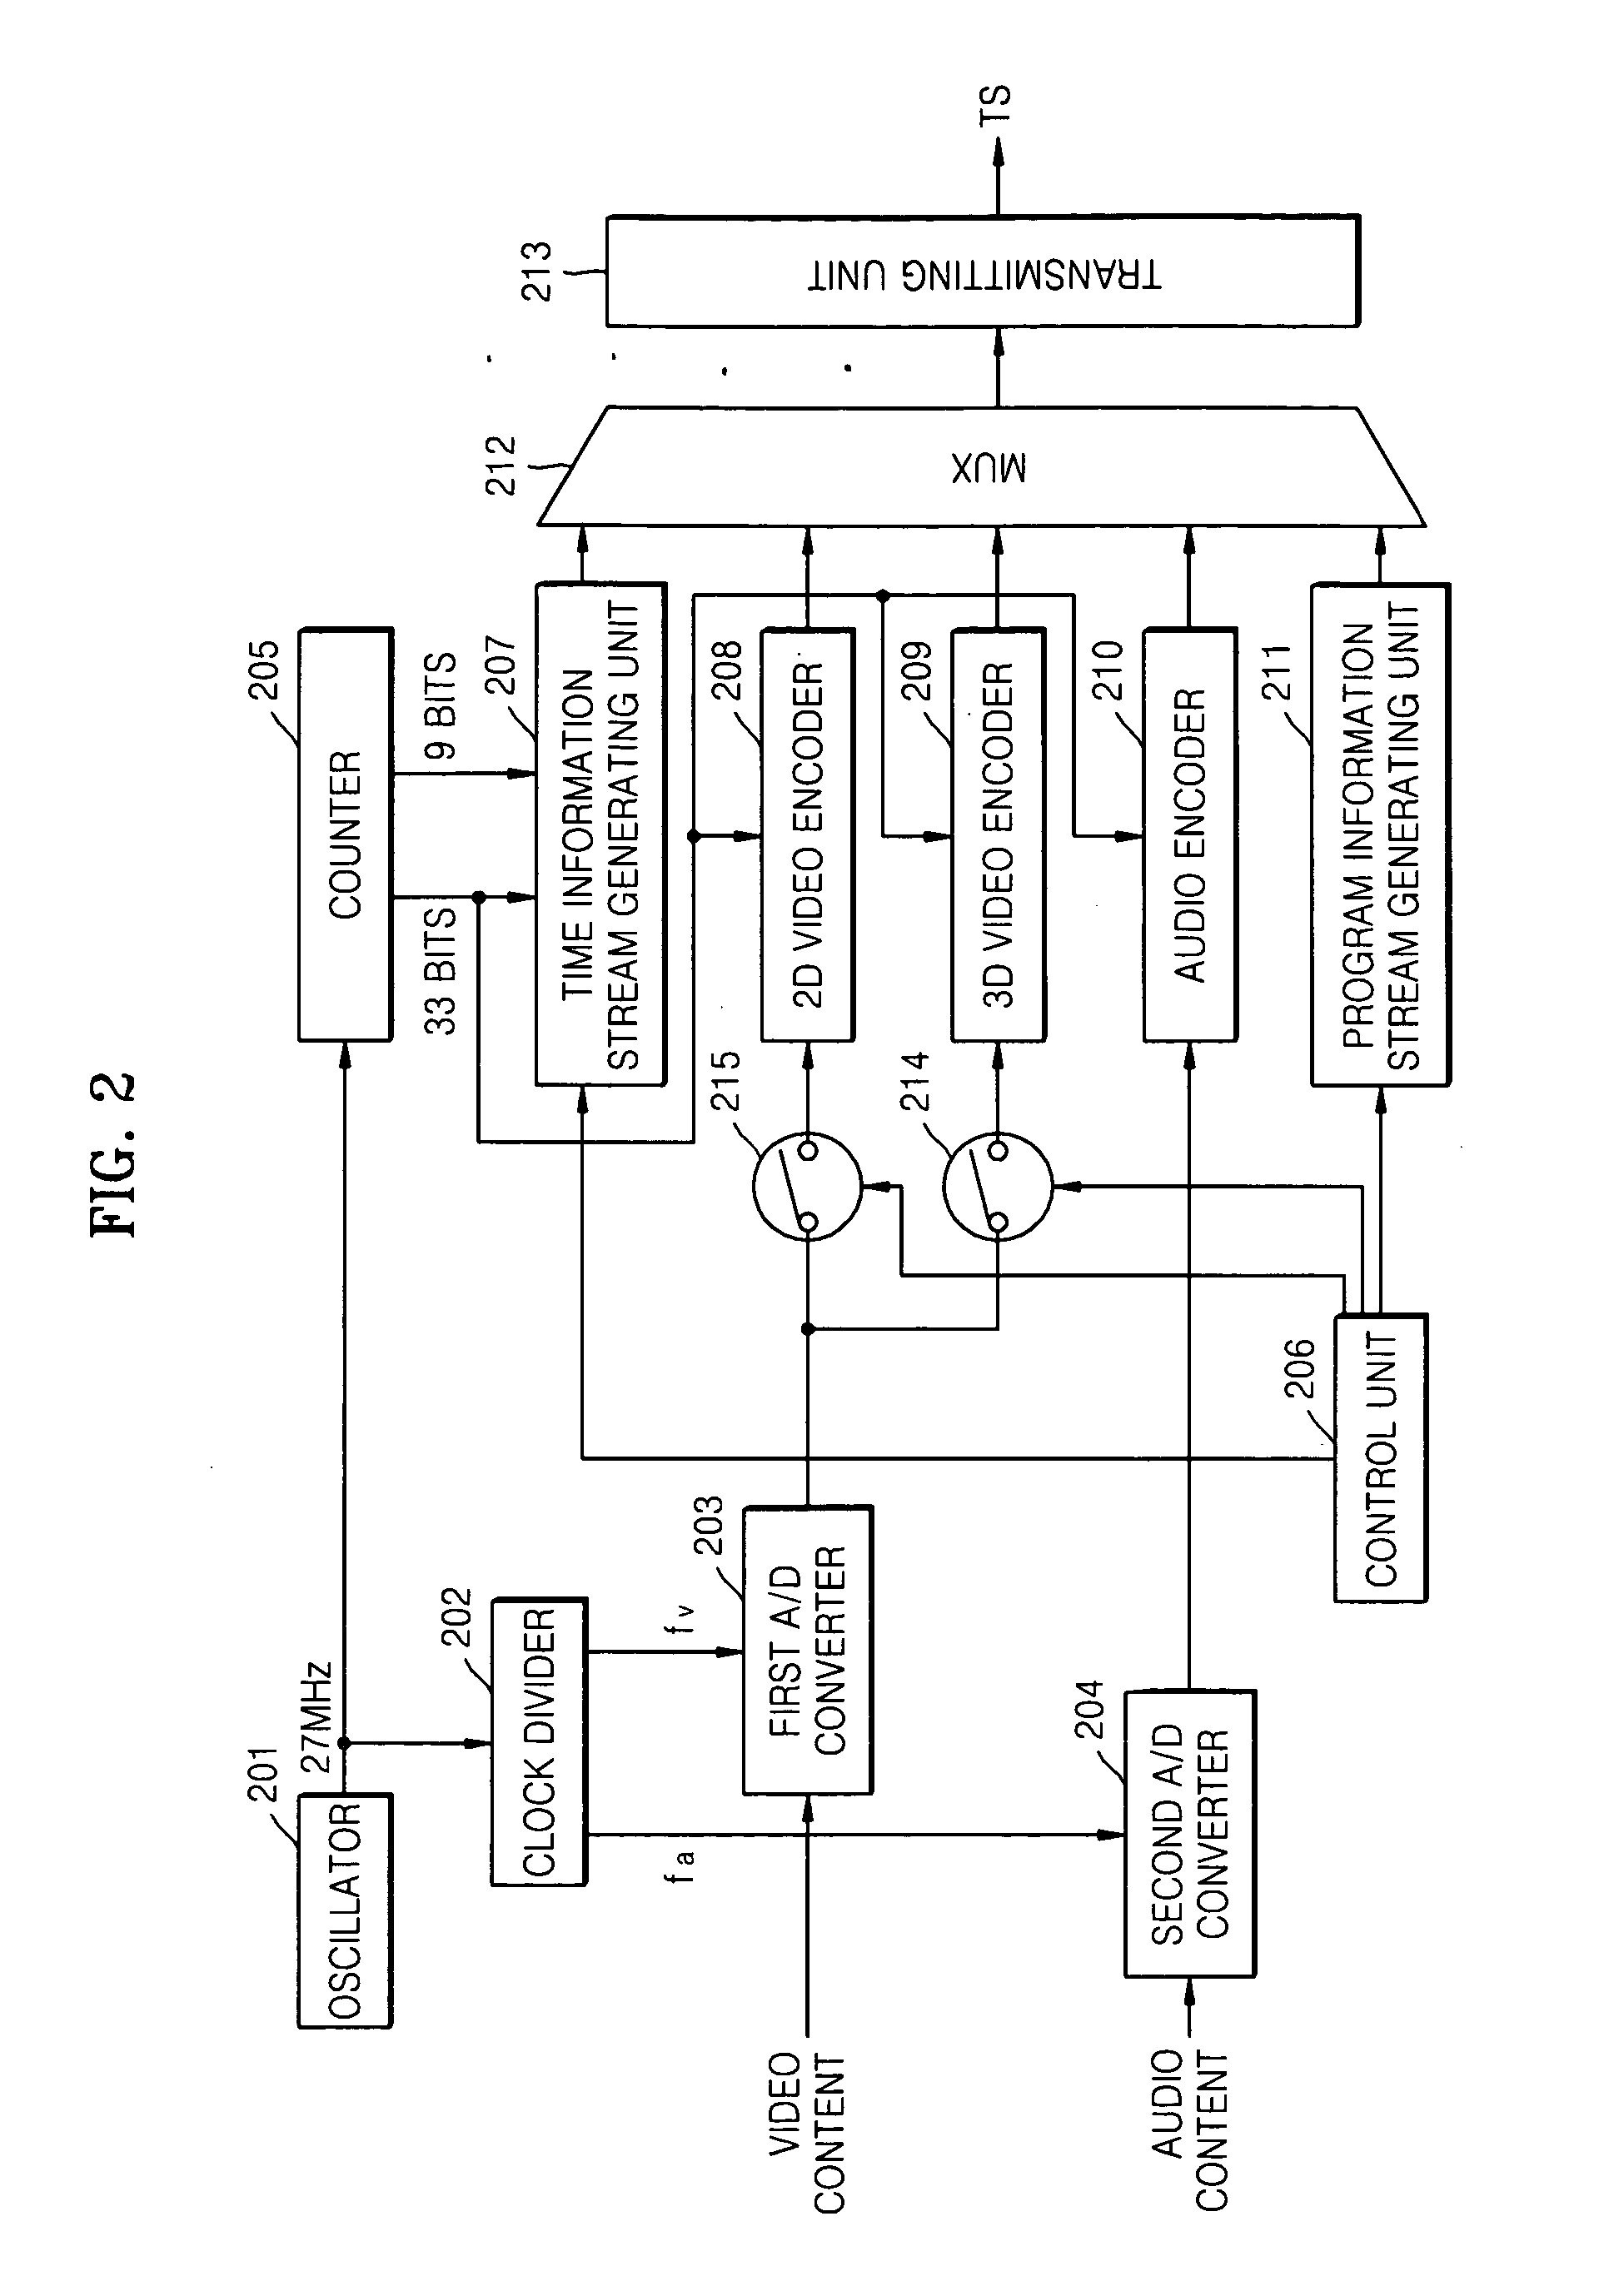 Method and apparatus for encoding/decoding video data to implement local three-dimensional video